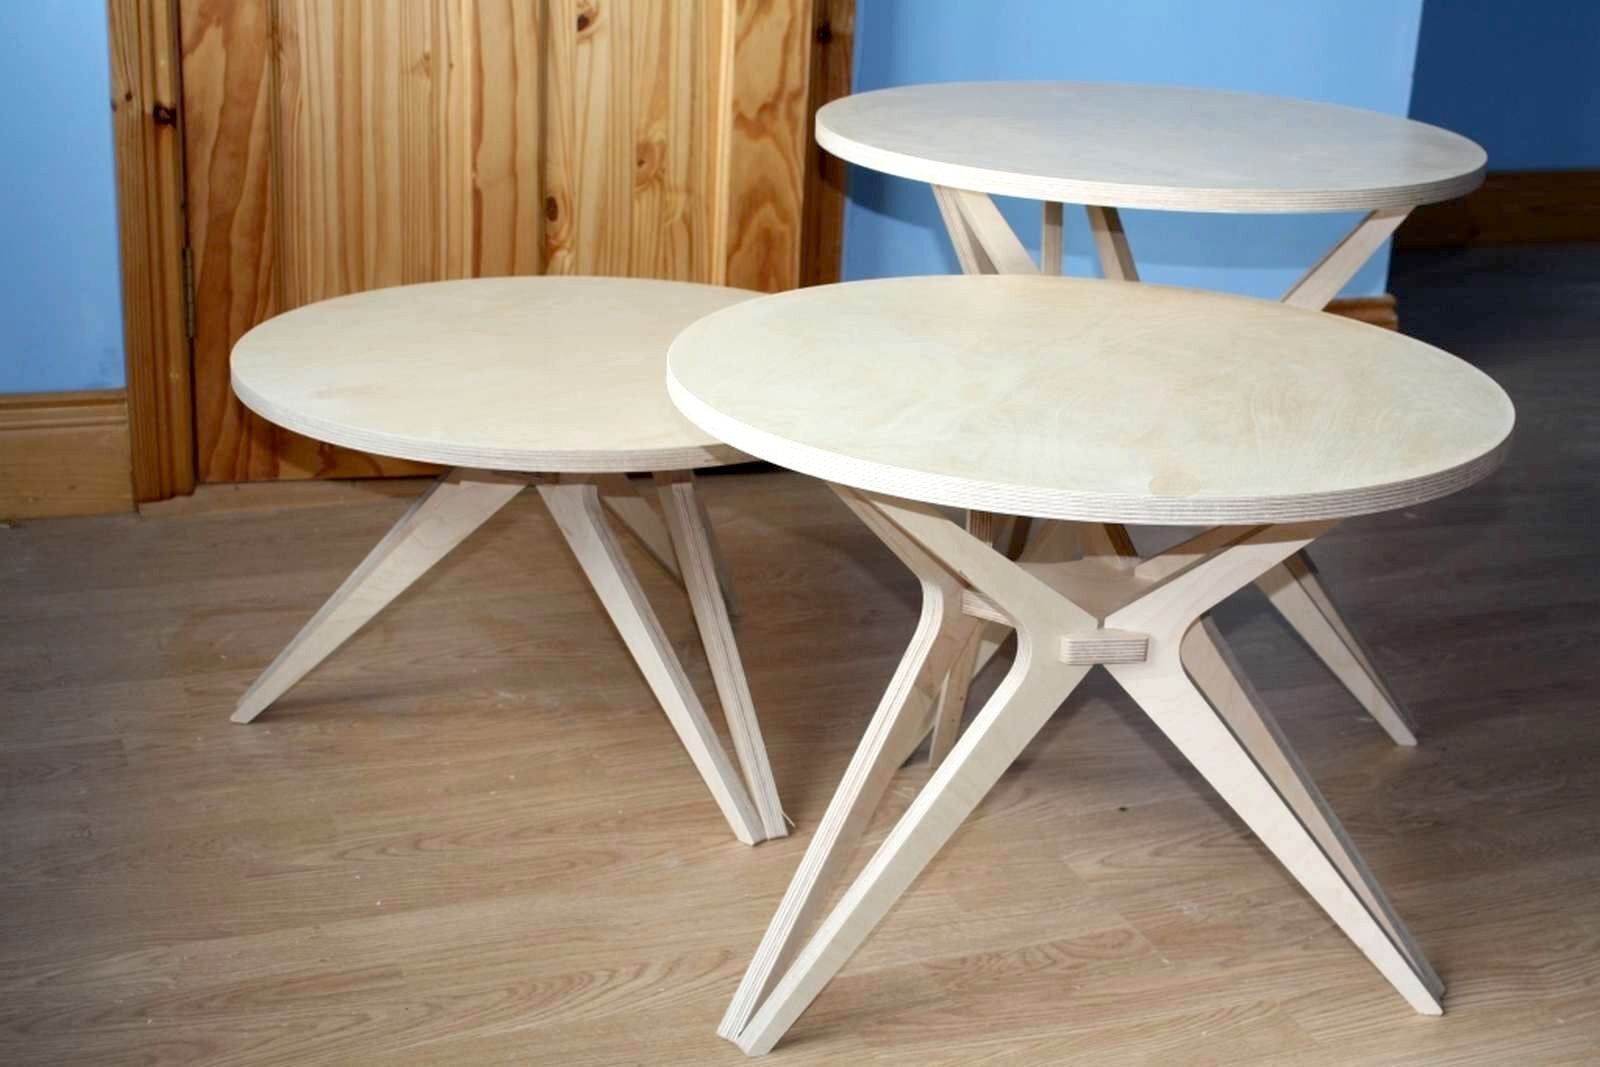 plywood-tables-created-with-the-jbec-cnc-router-08.jpg